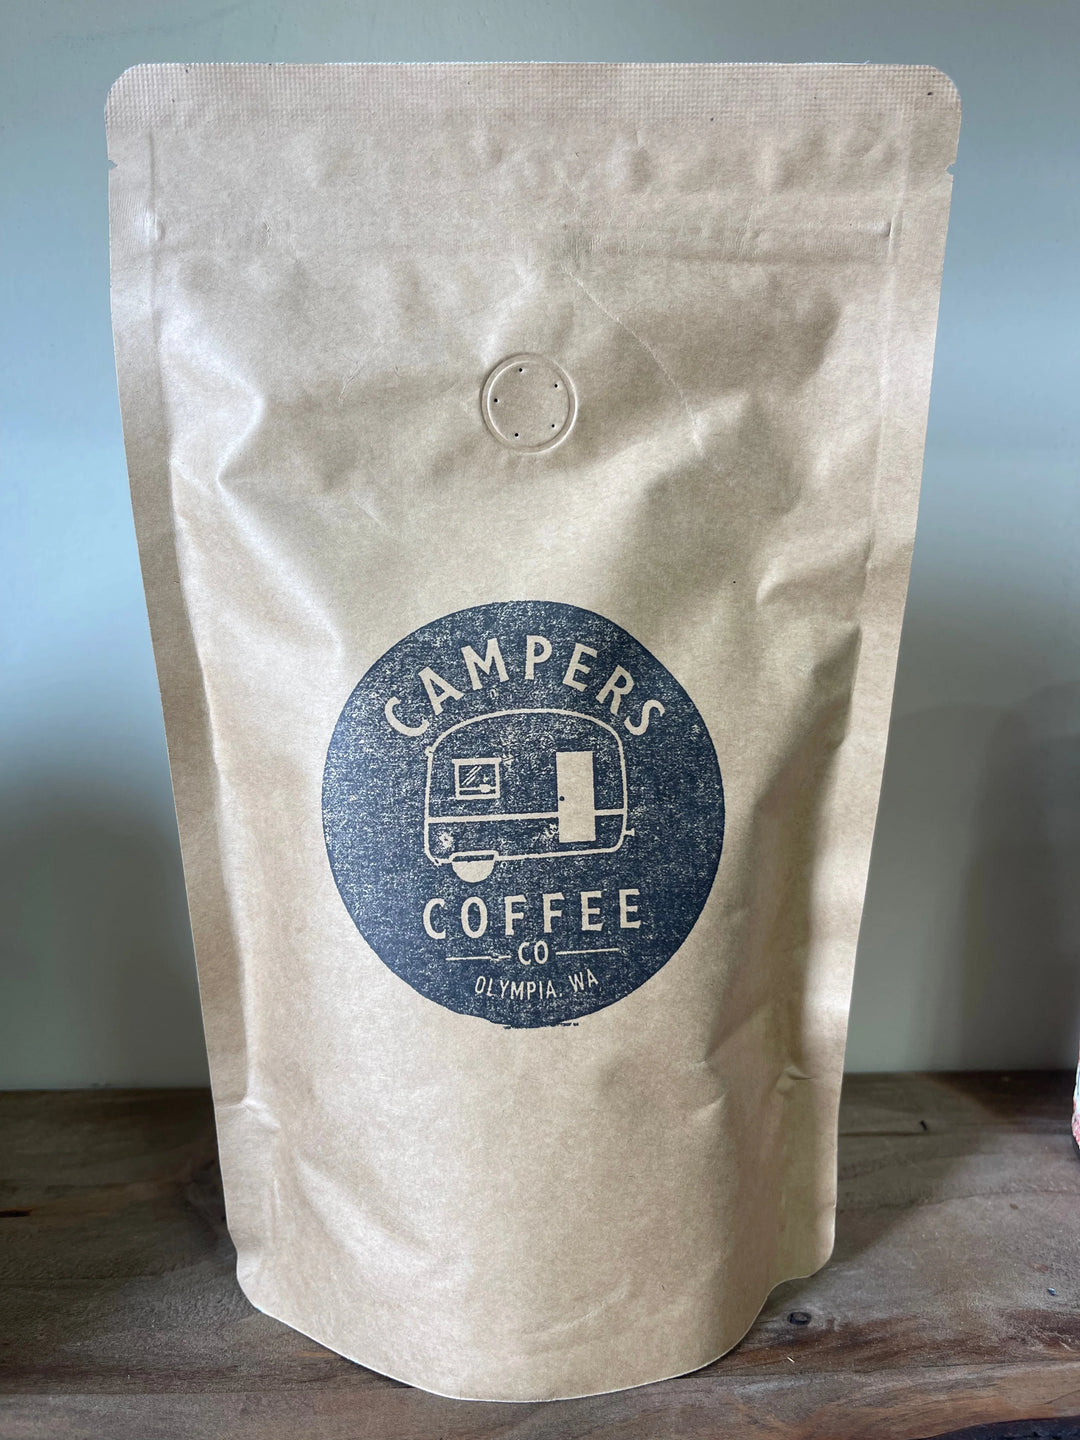 Campers Coffee- India 10 oz.